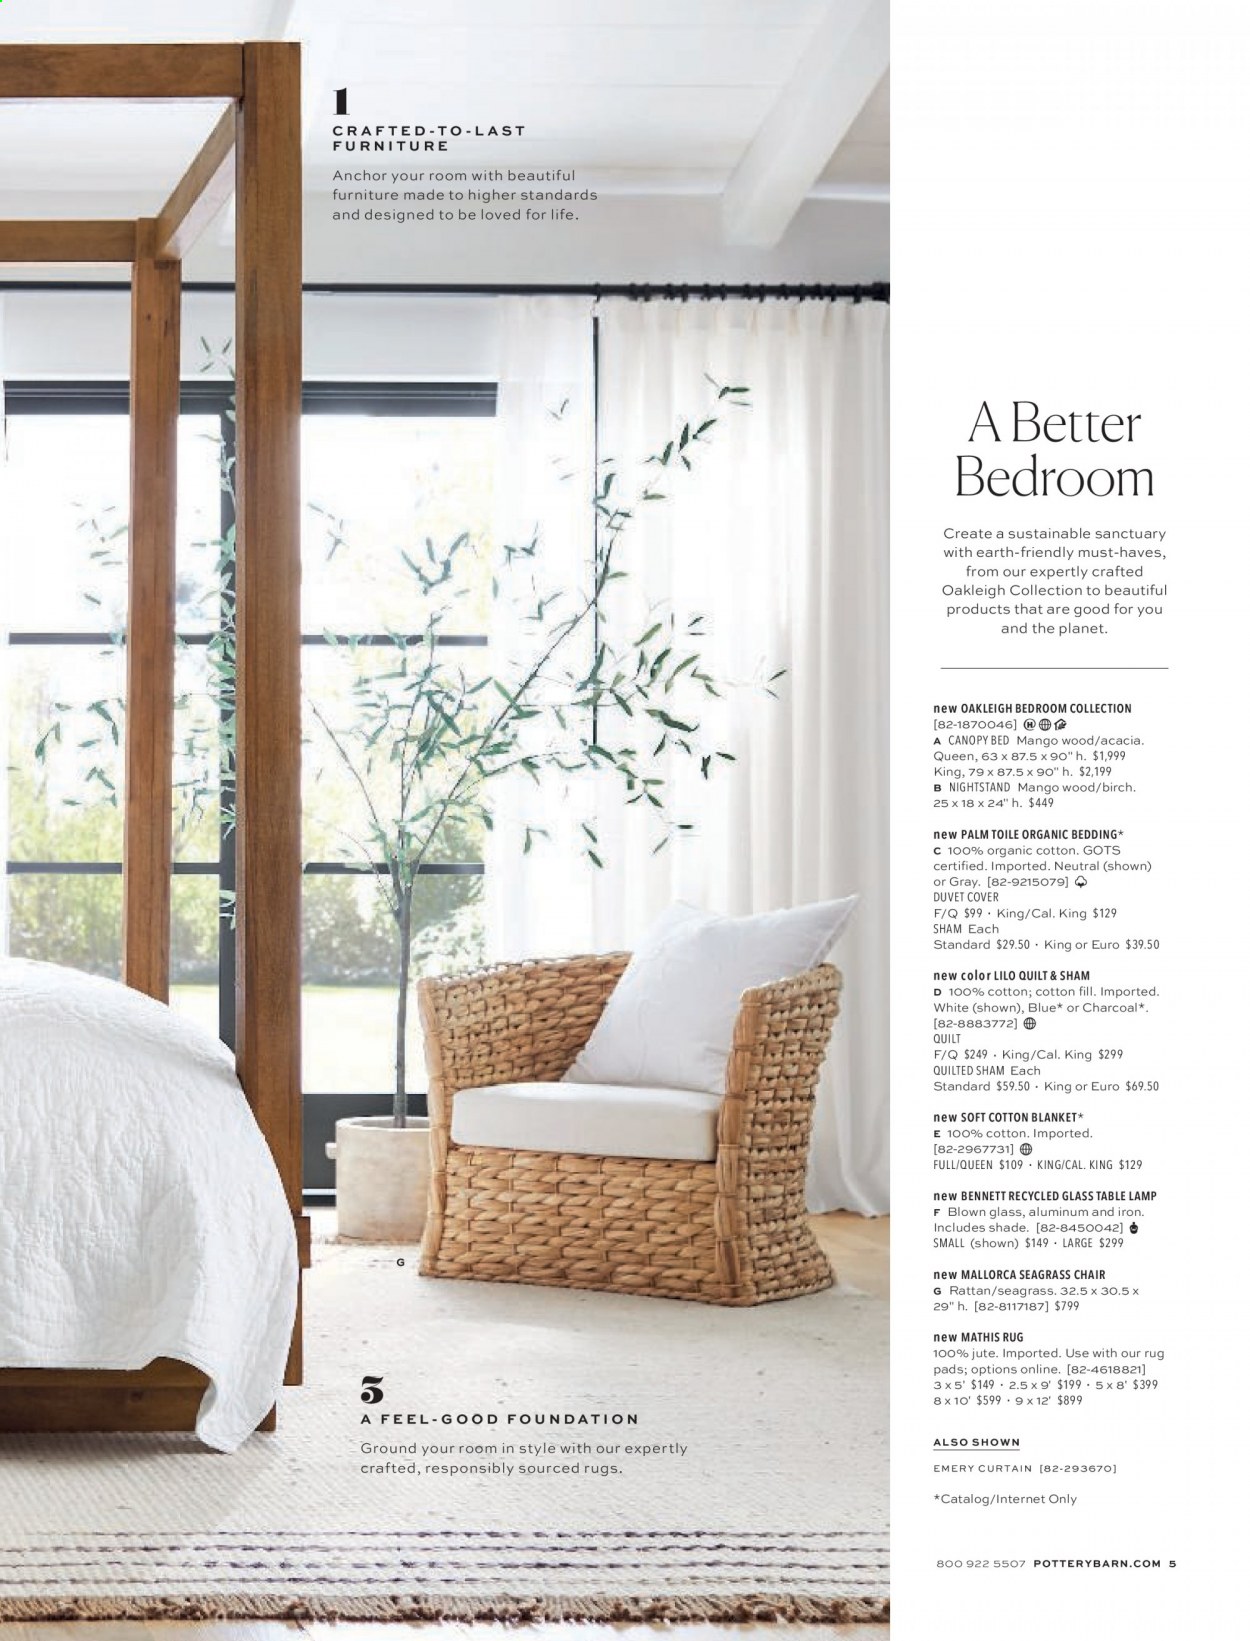 thumbnail - Pottery Barn Flyer - Sales products - chair, bed, nightstand, bedding, blanket, duvet, quilt & sham, quilt, curtain, lamp, table lamp, rug. Page 5.